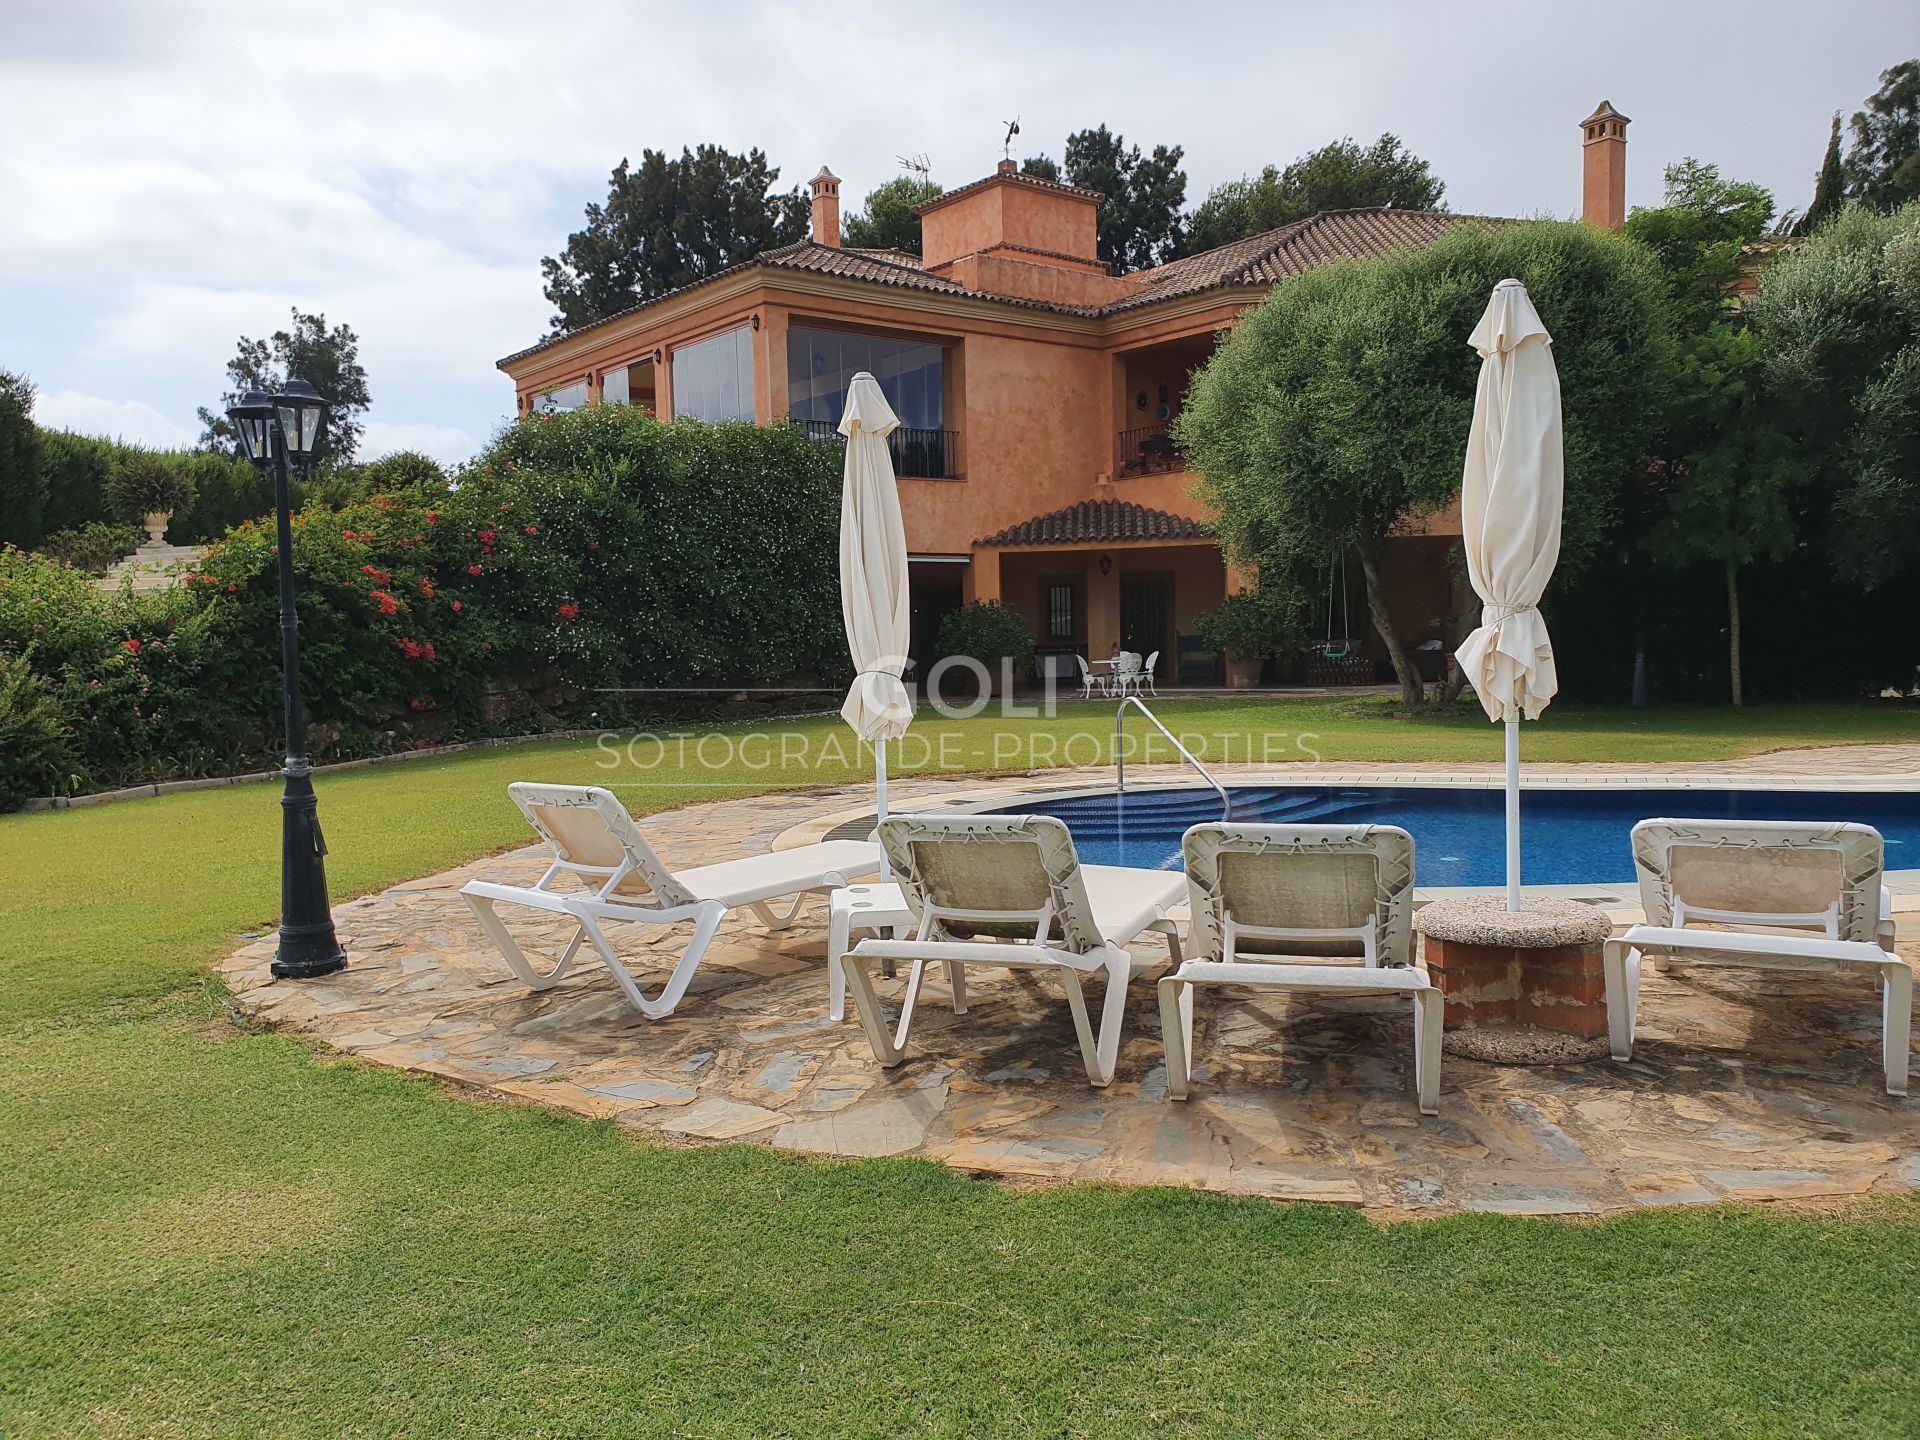 E Zone - A large property situated in Upper Sotogrande